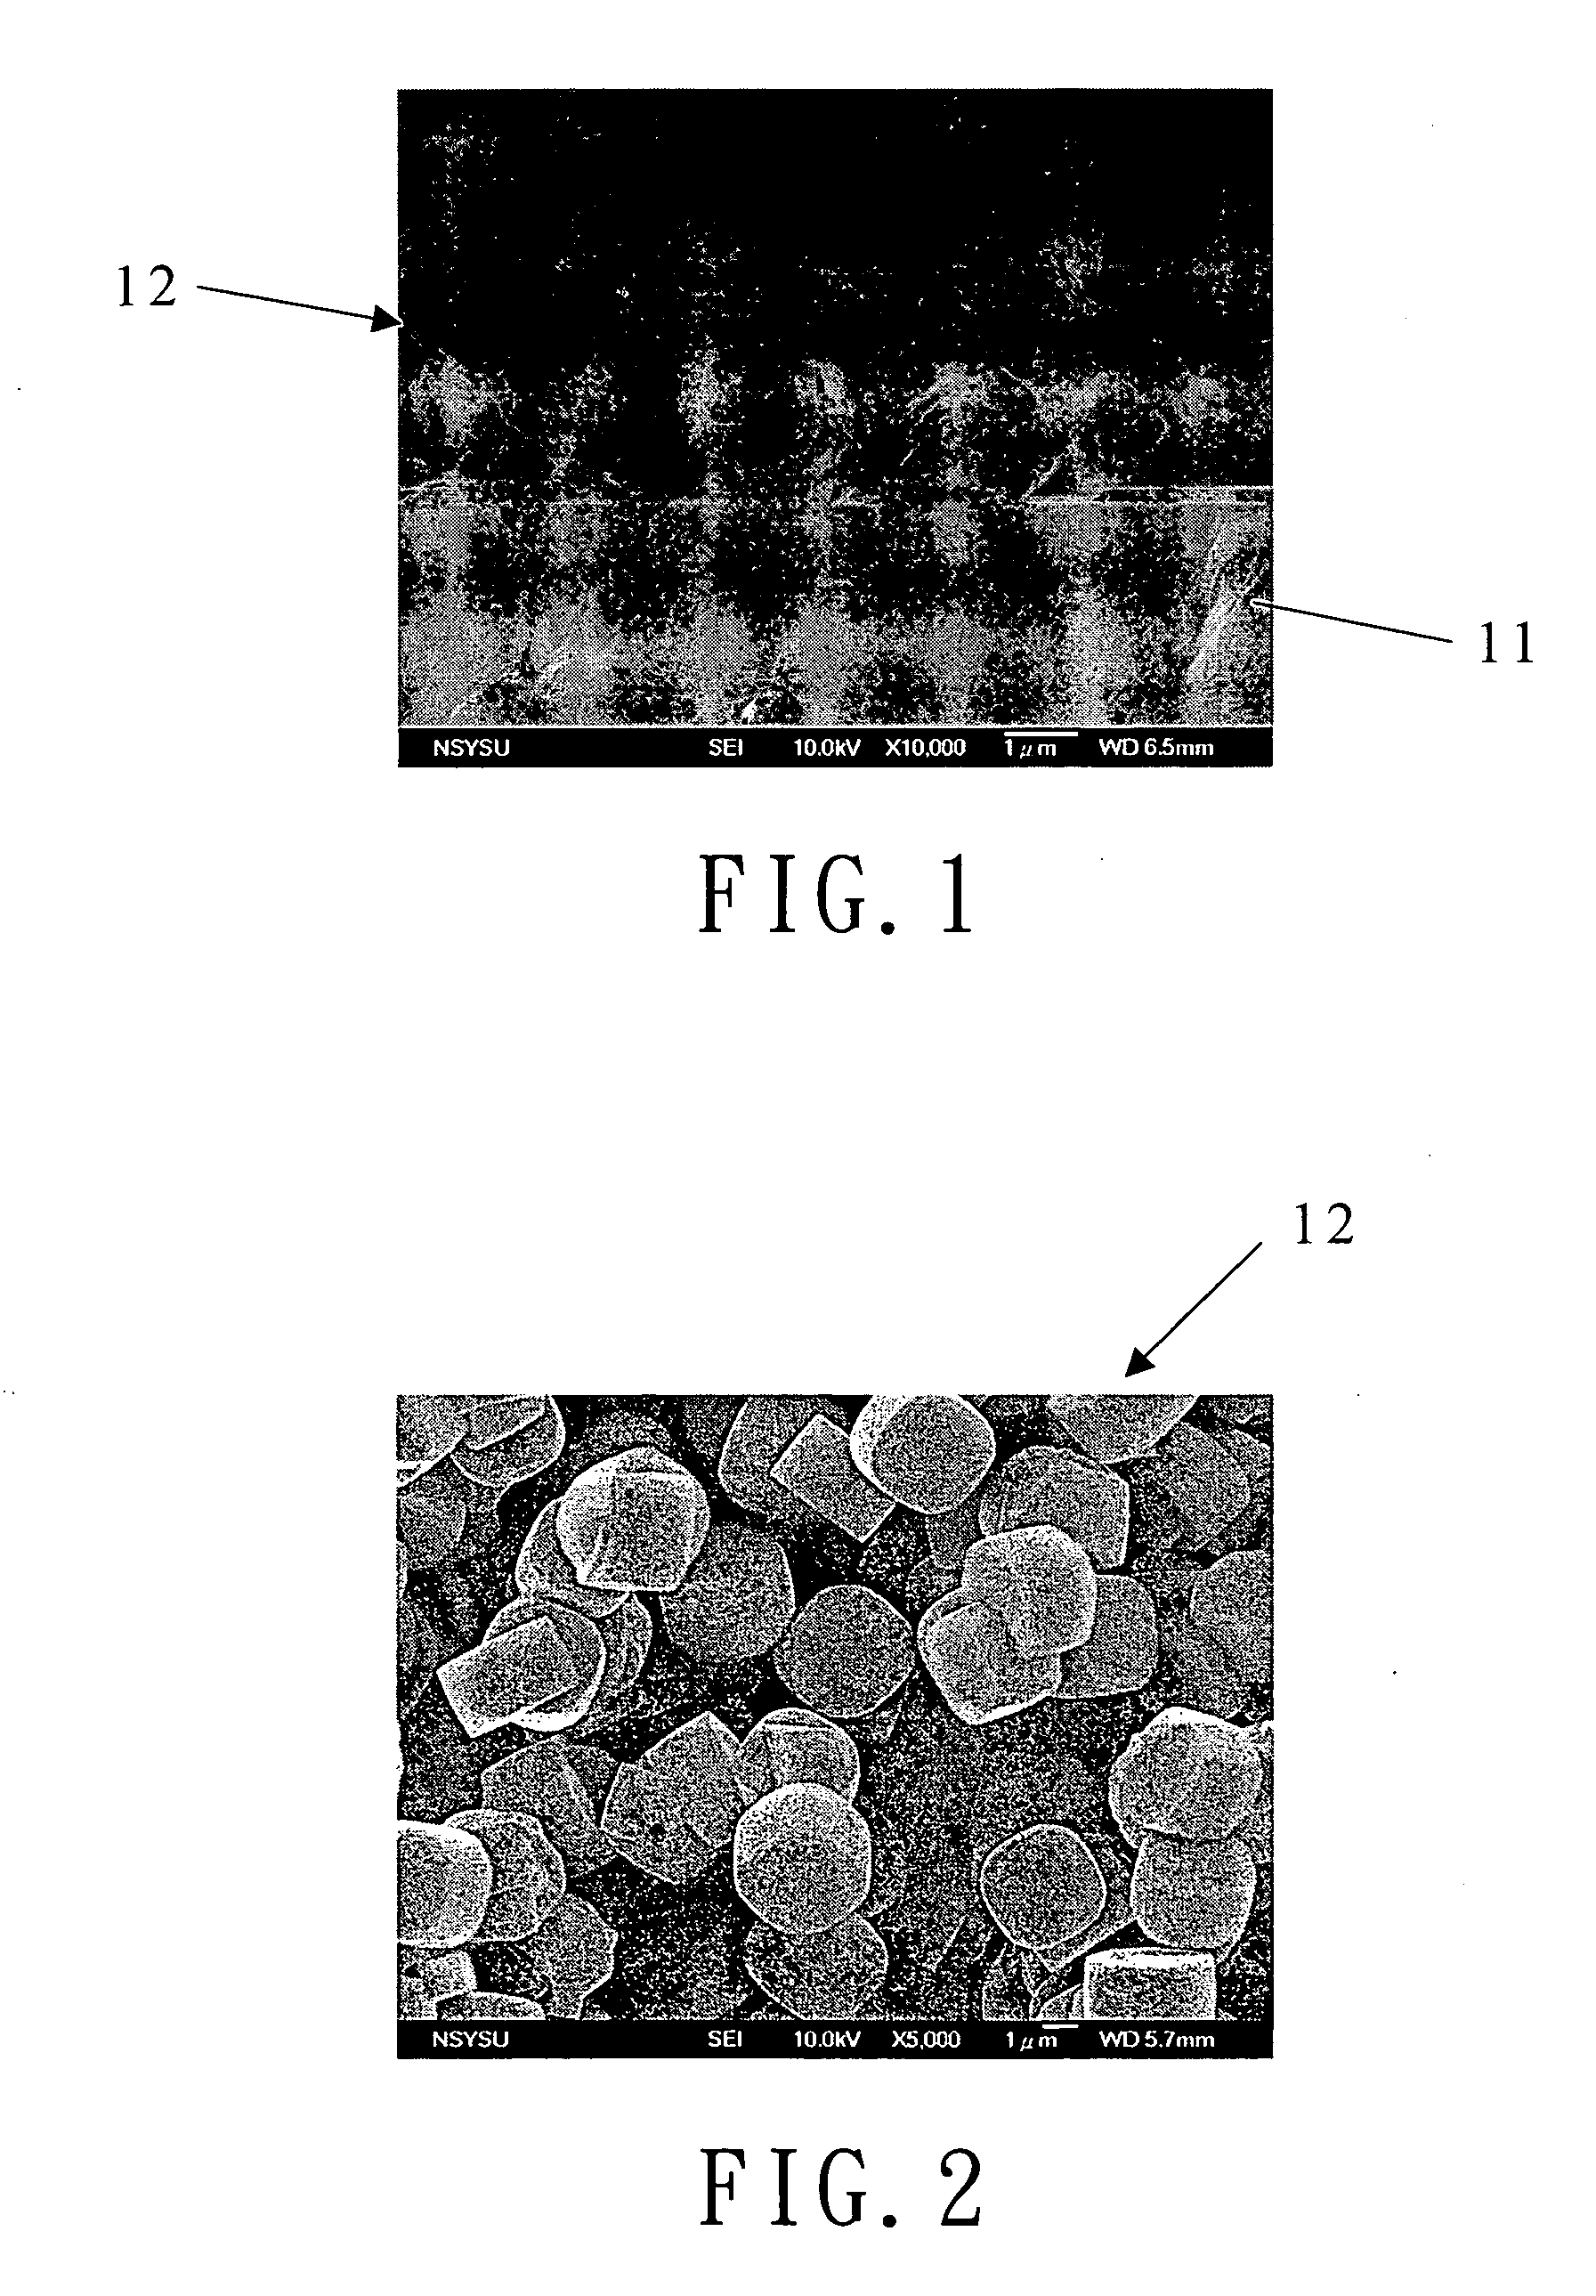 Titanate-containing material and method for making the same